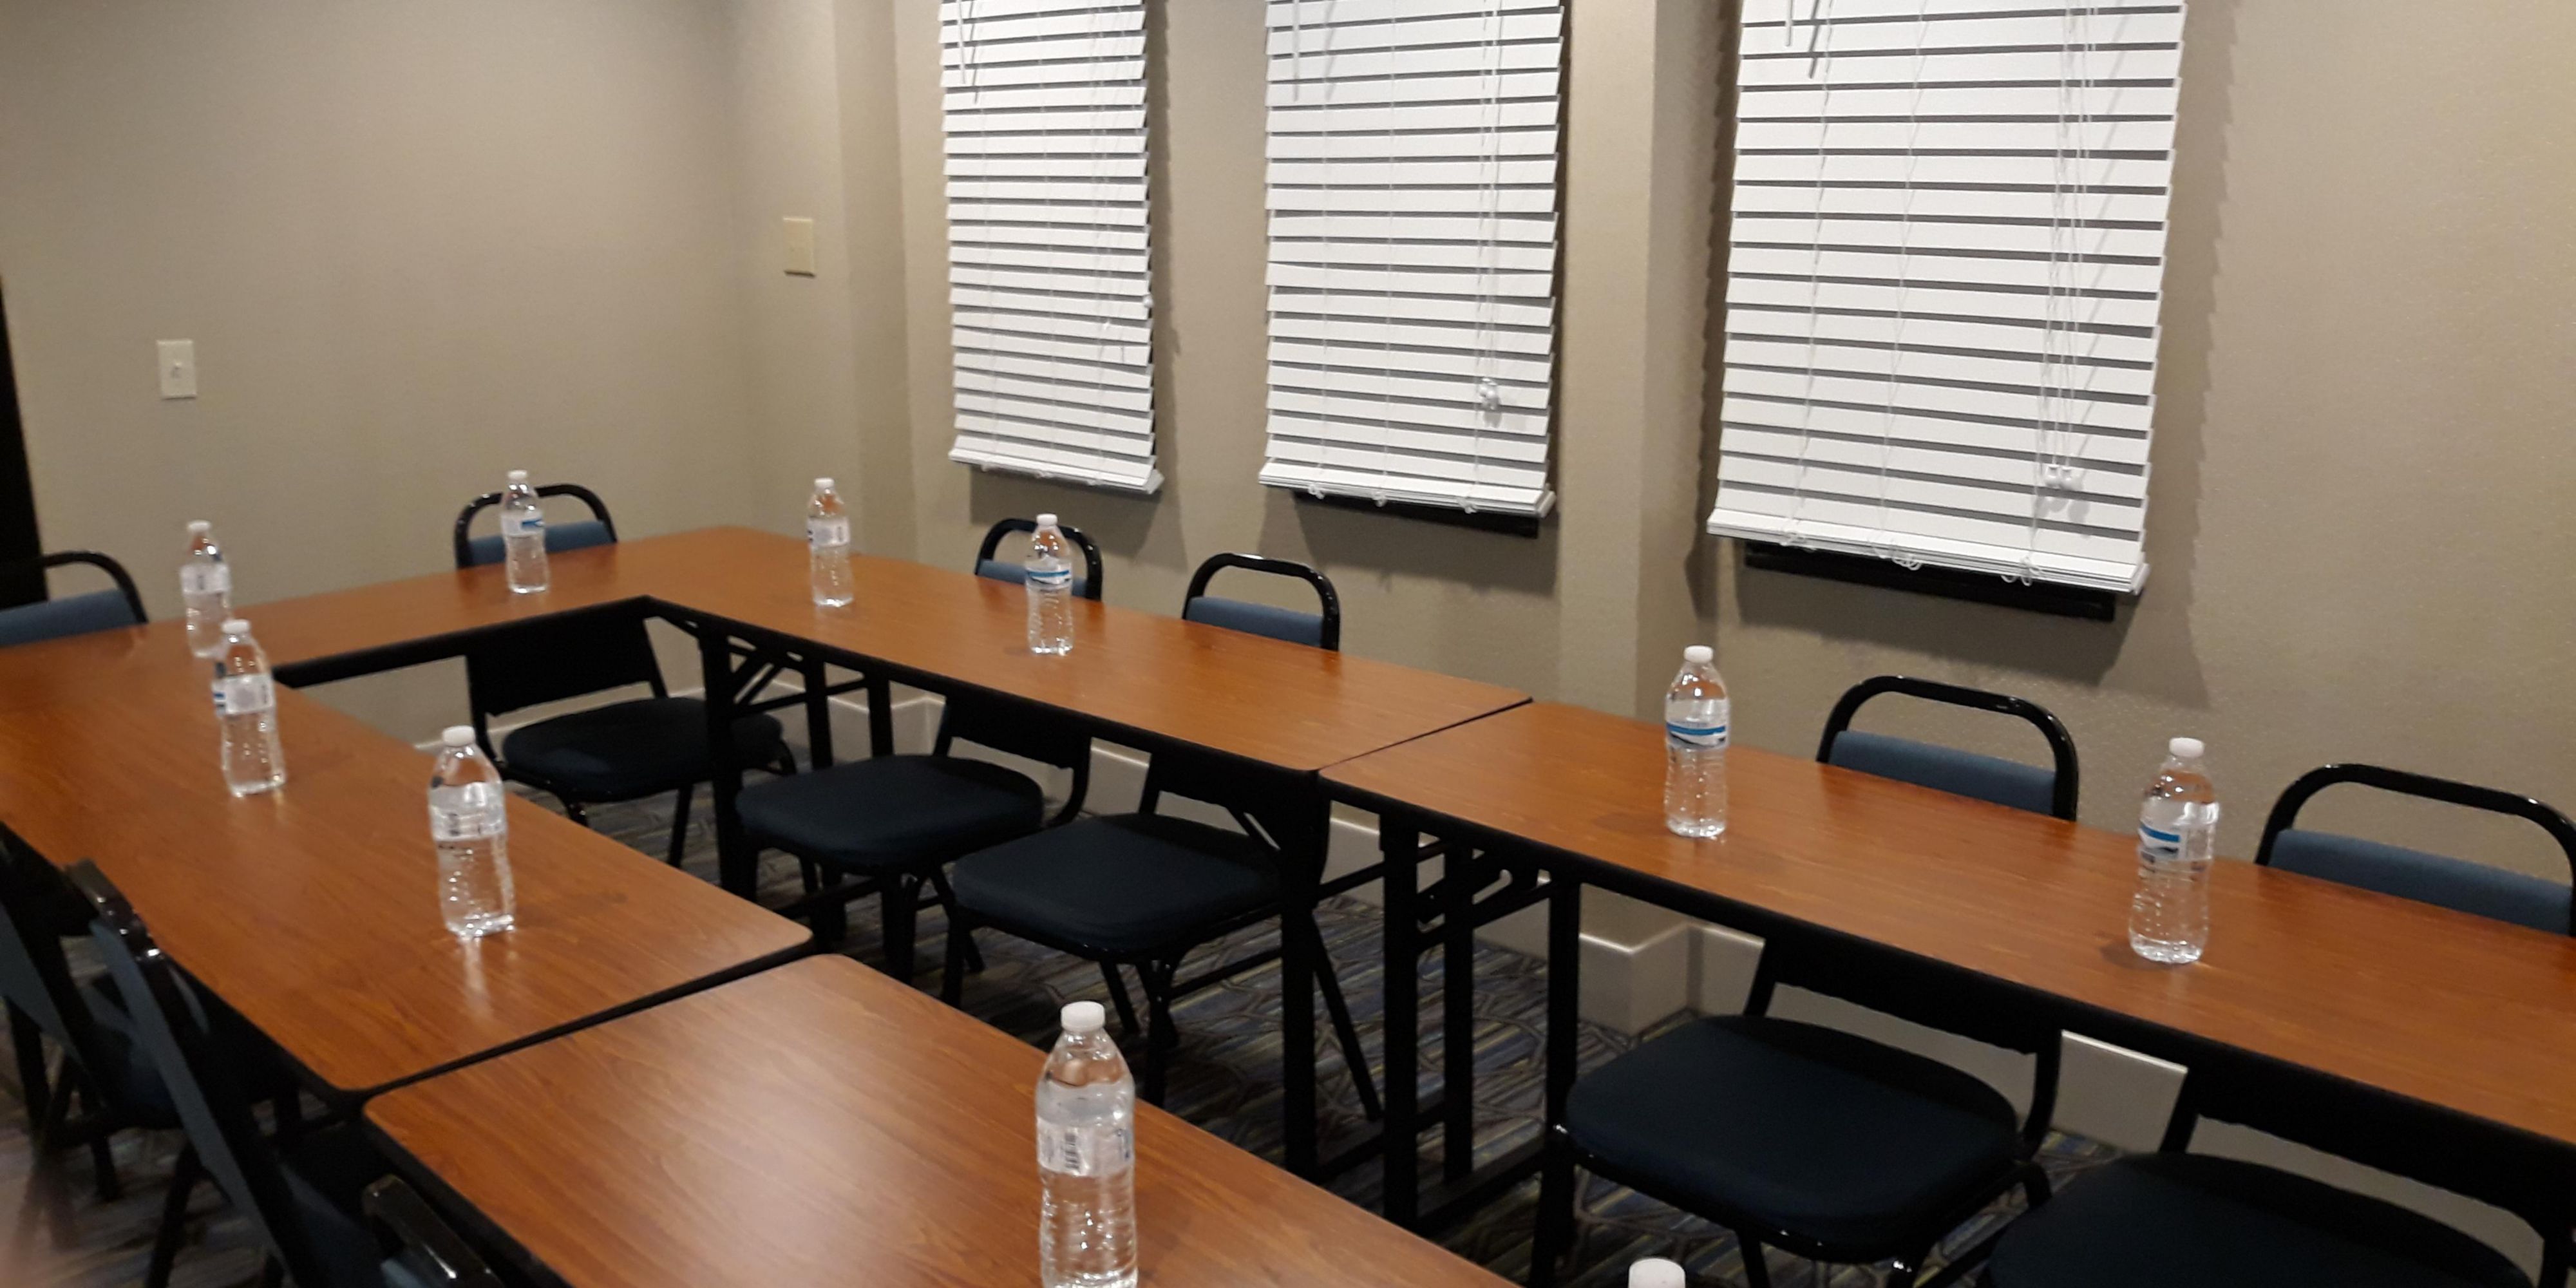 Small meetings play a vital role in the success of many organizations. Are you planning a small corporate meeting, board retreat or brainstorming session? Our meeting space is sure to lead to big ideas! For groups up to 10 people, we can help! Our Director of Sales is dedicated to making your meeting a huge success